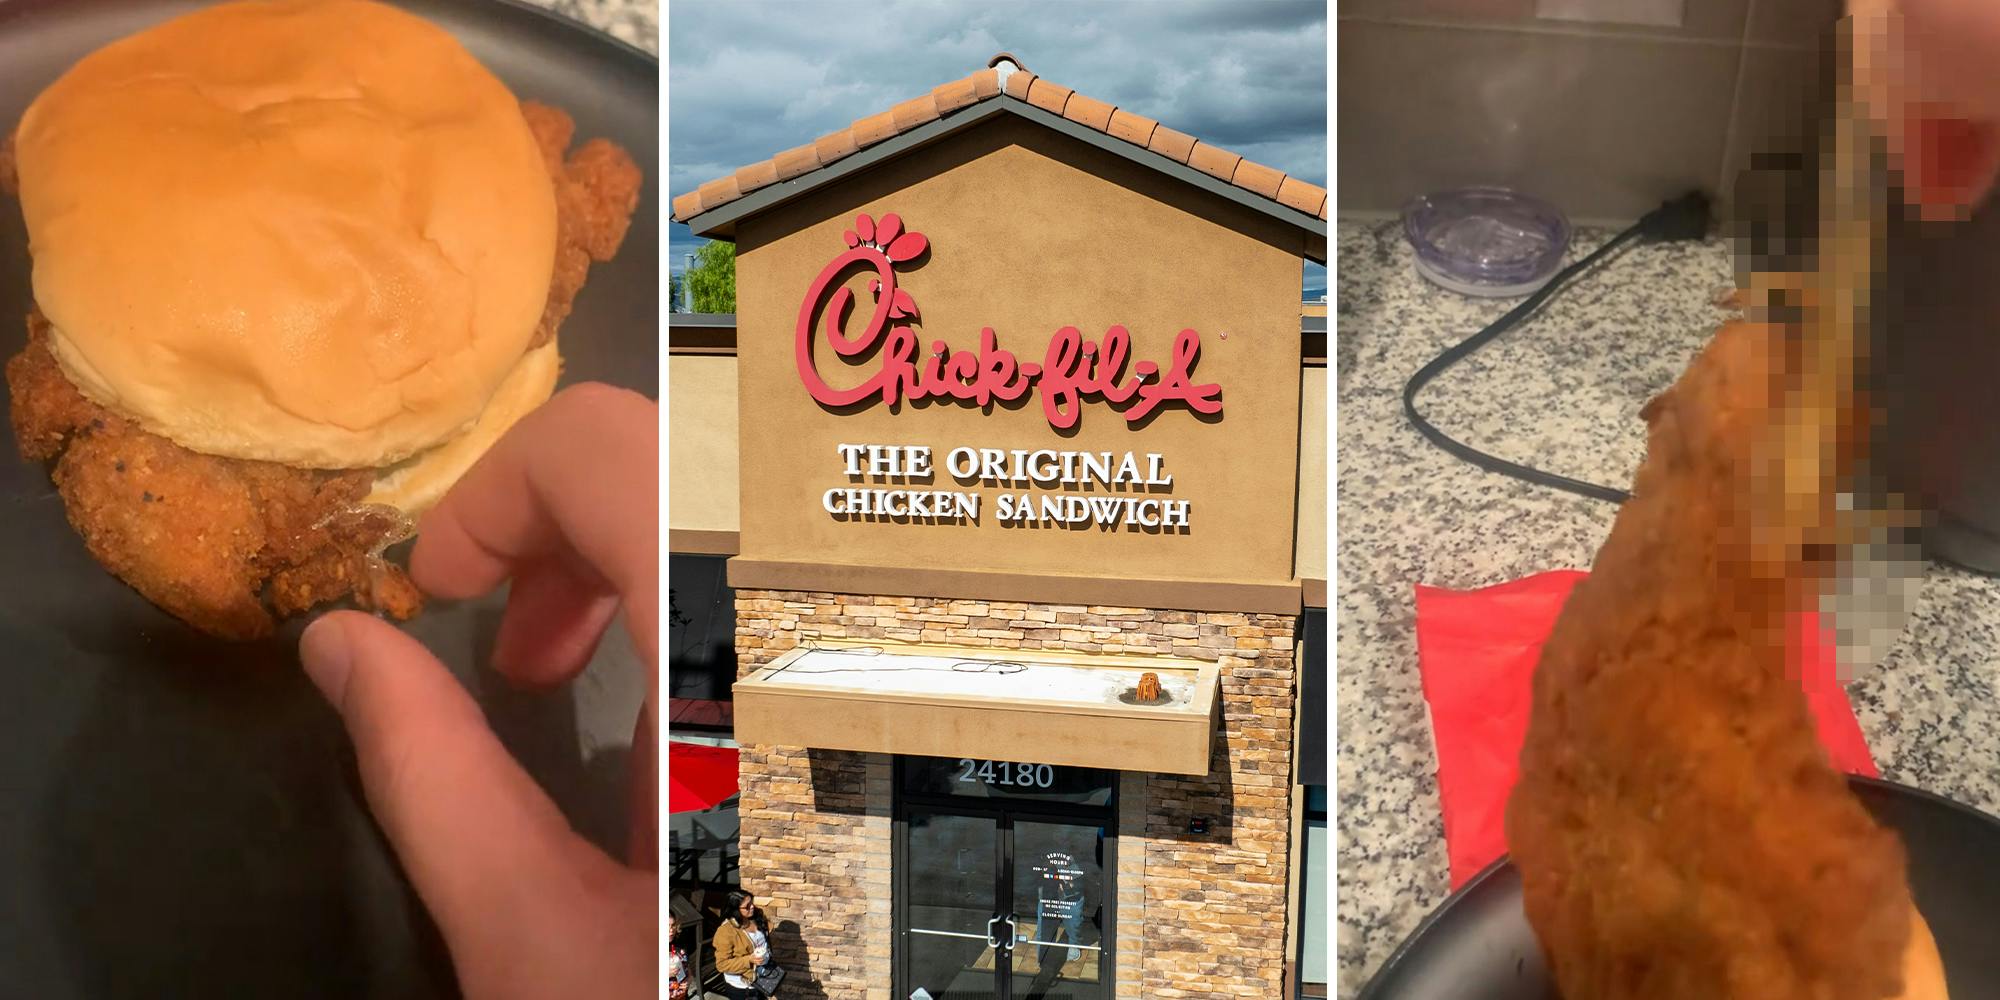 ‘That’s a whole choking hazard’: Chick-fil-A customer finds something unusual in chicken sandwich